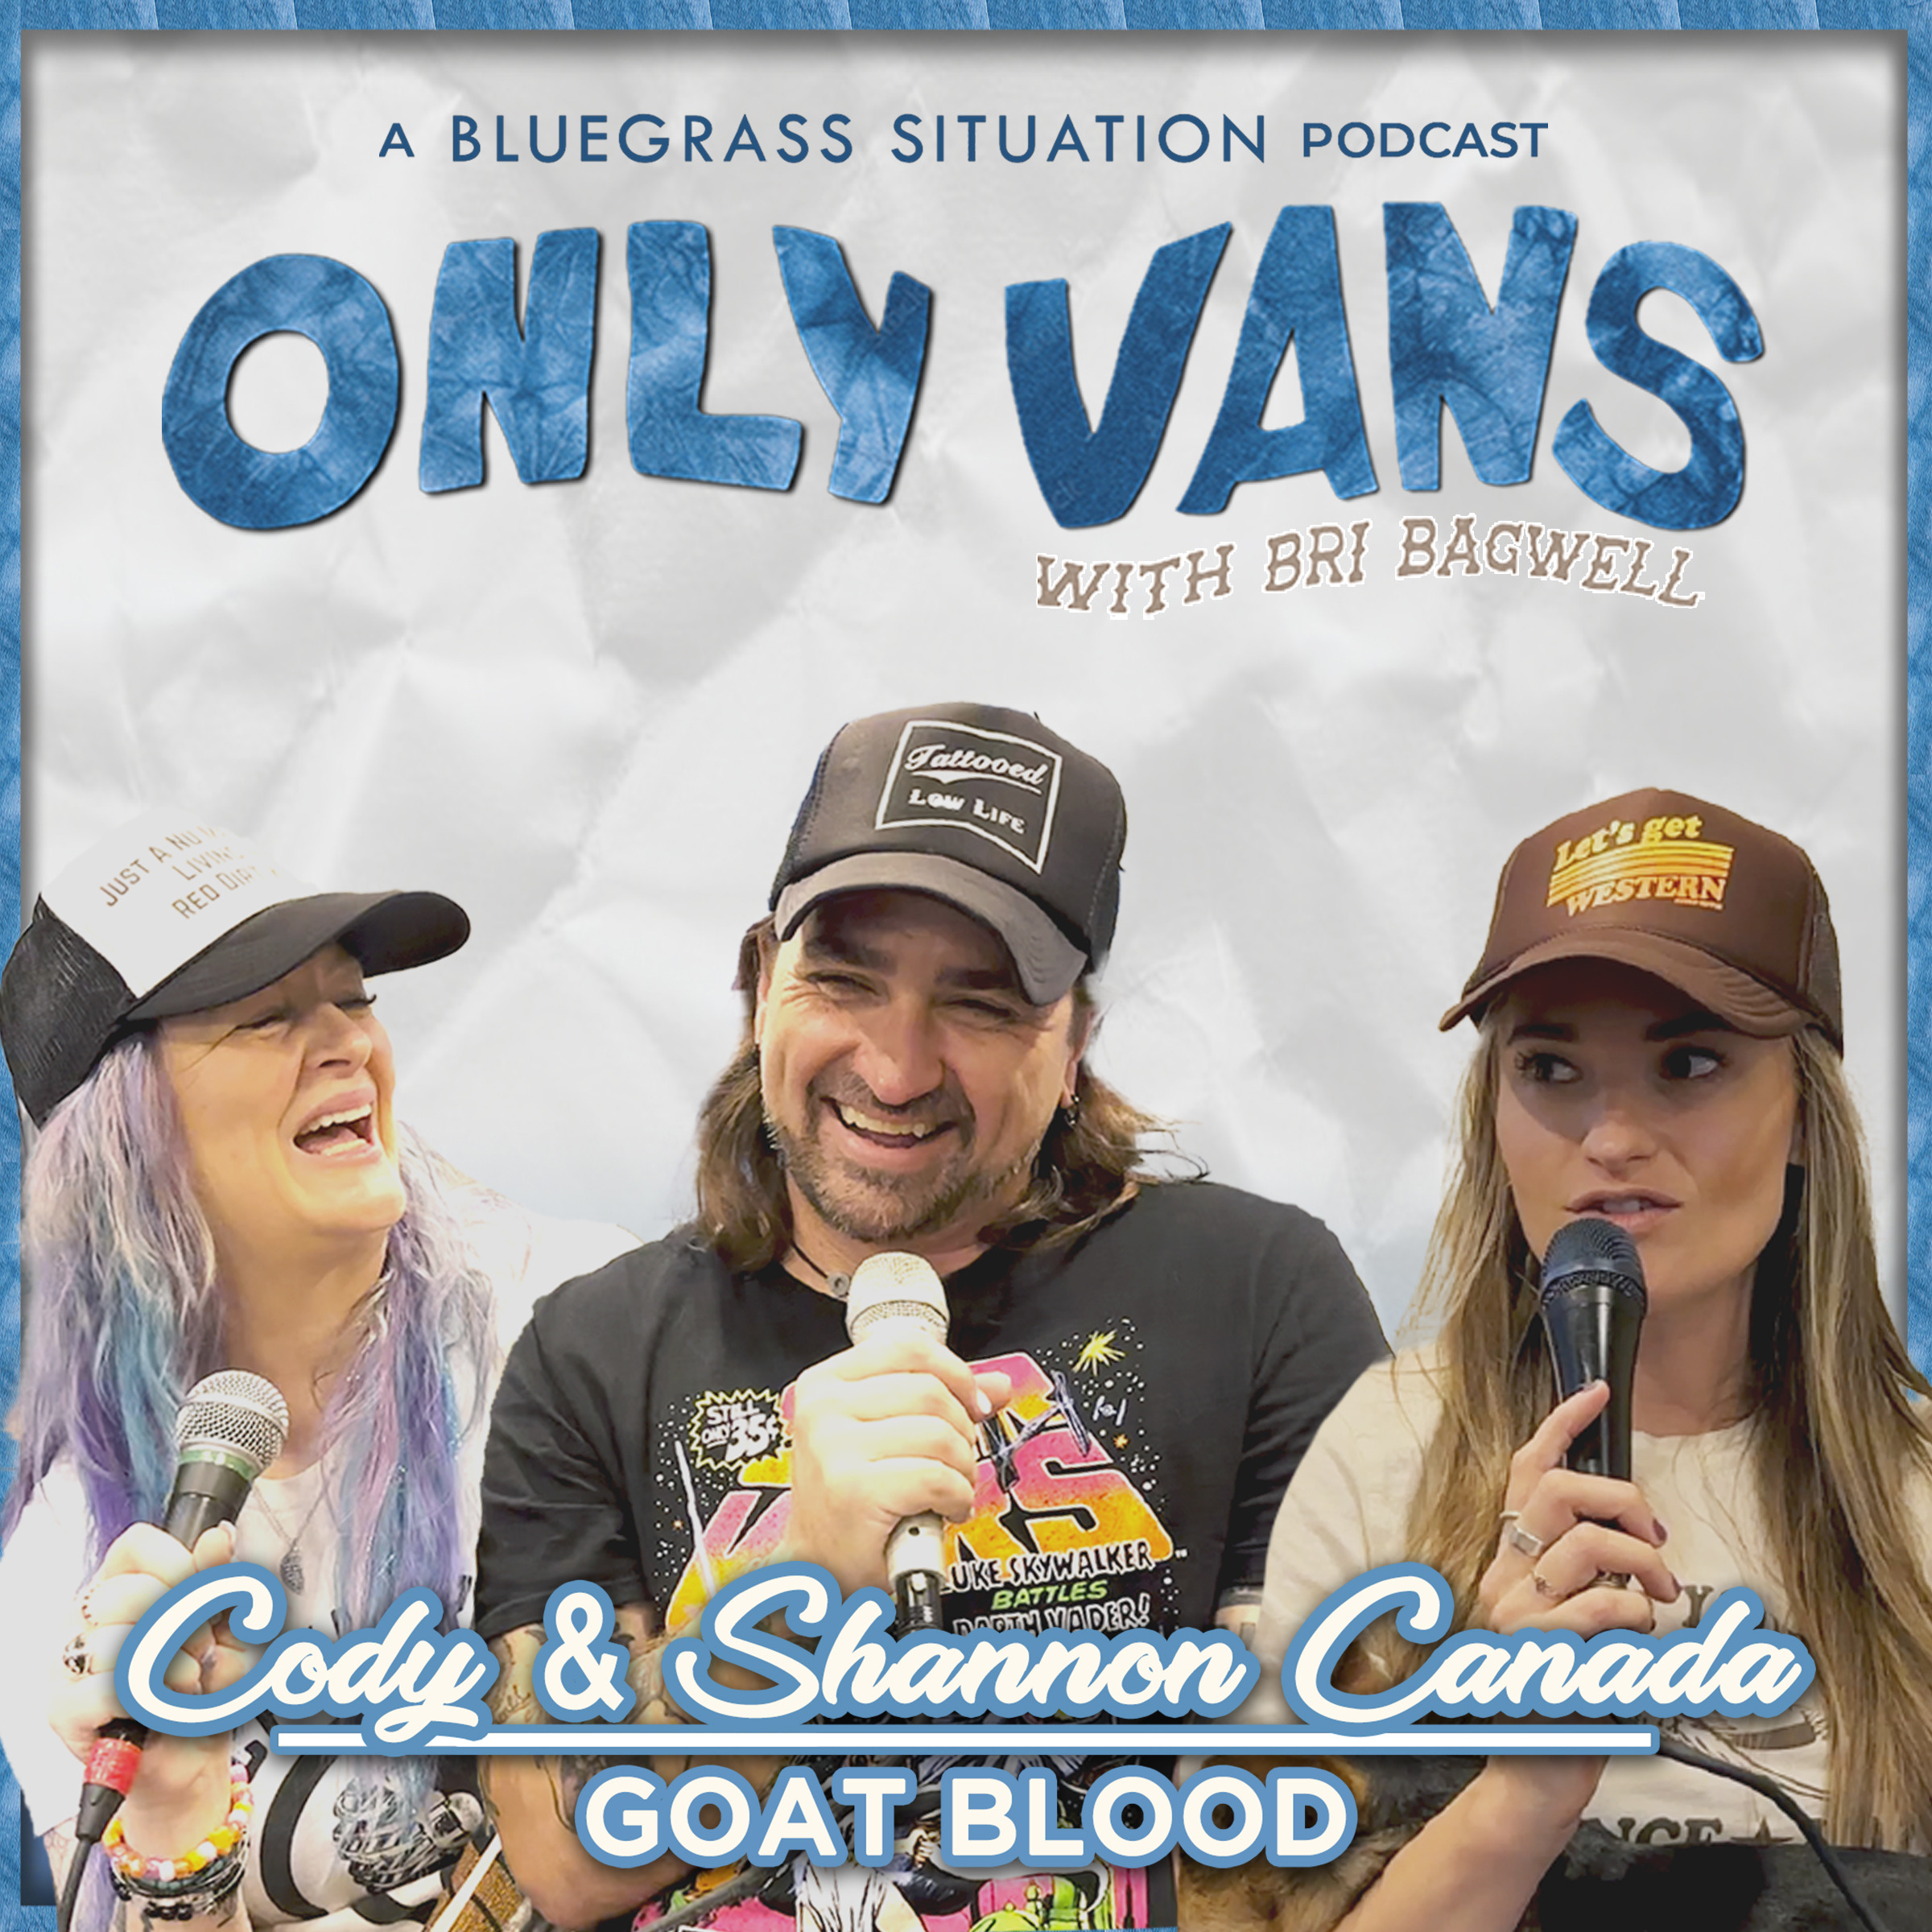 GOAT BLOOD with CODY & SHANNON CANADA